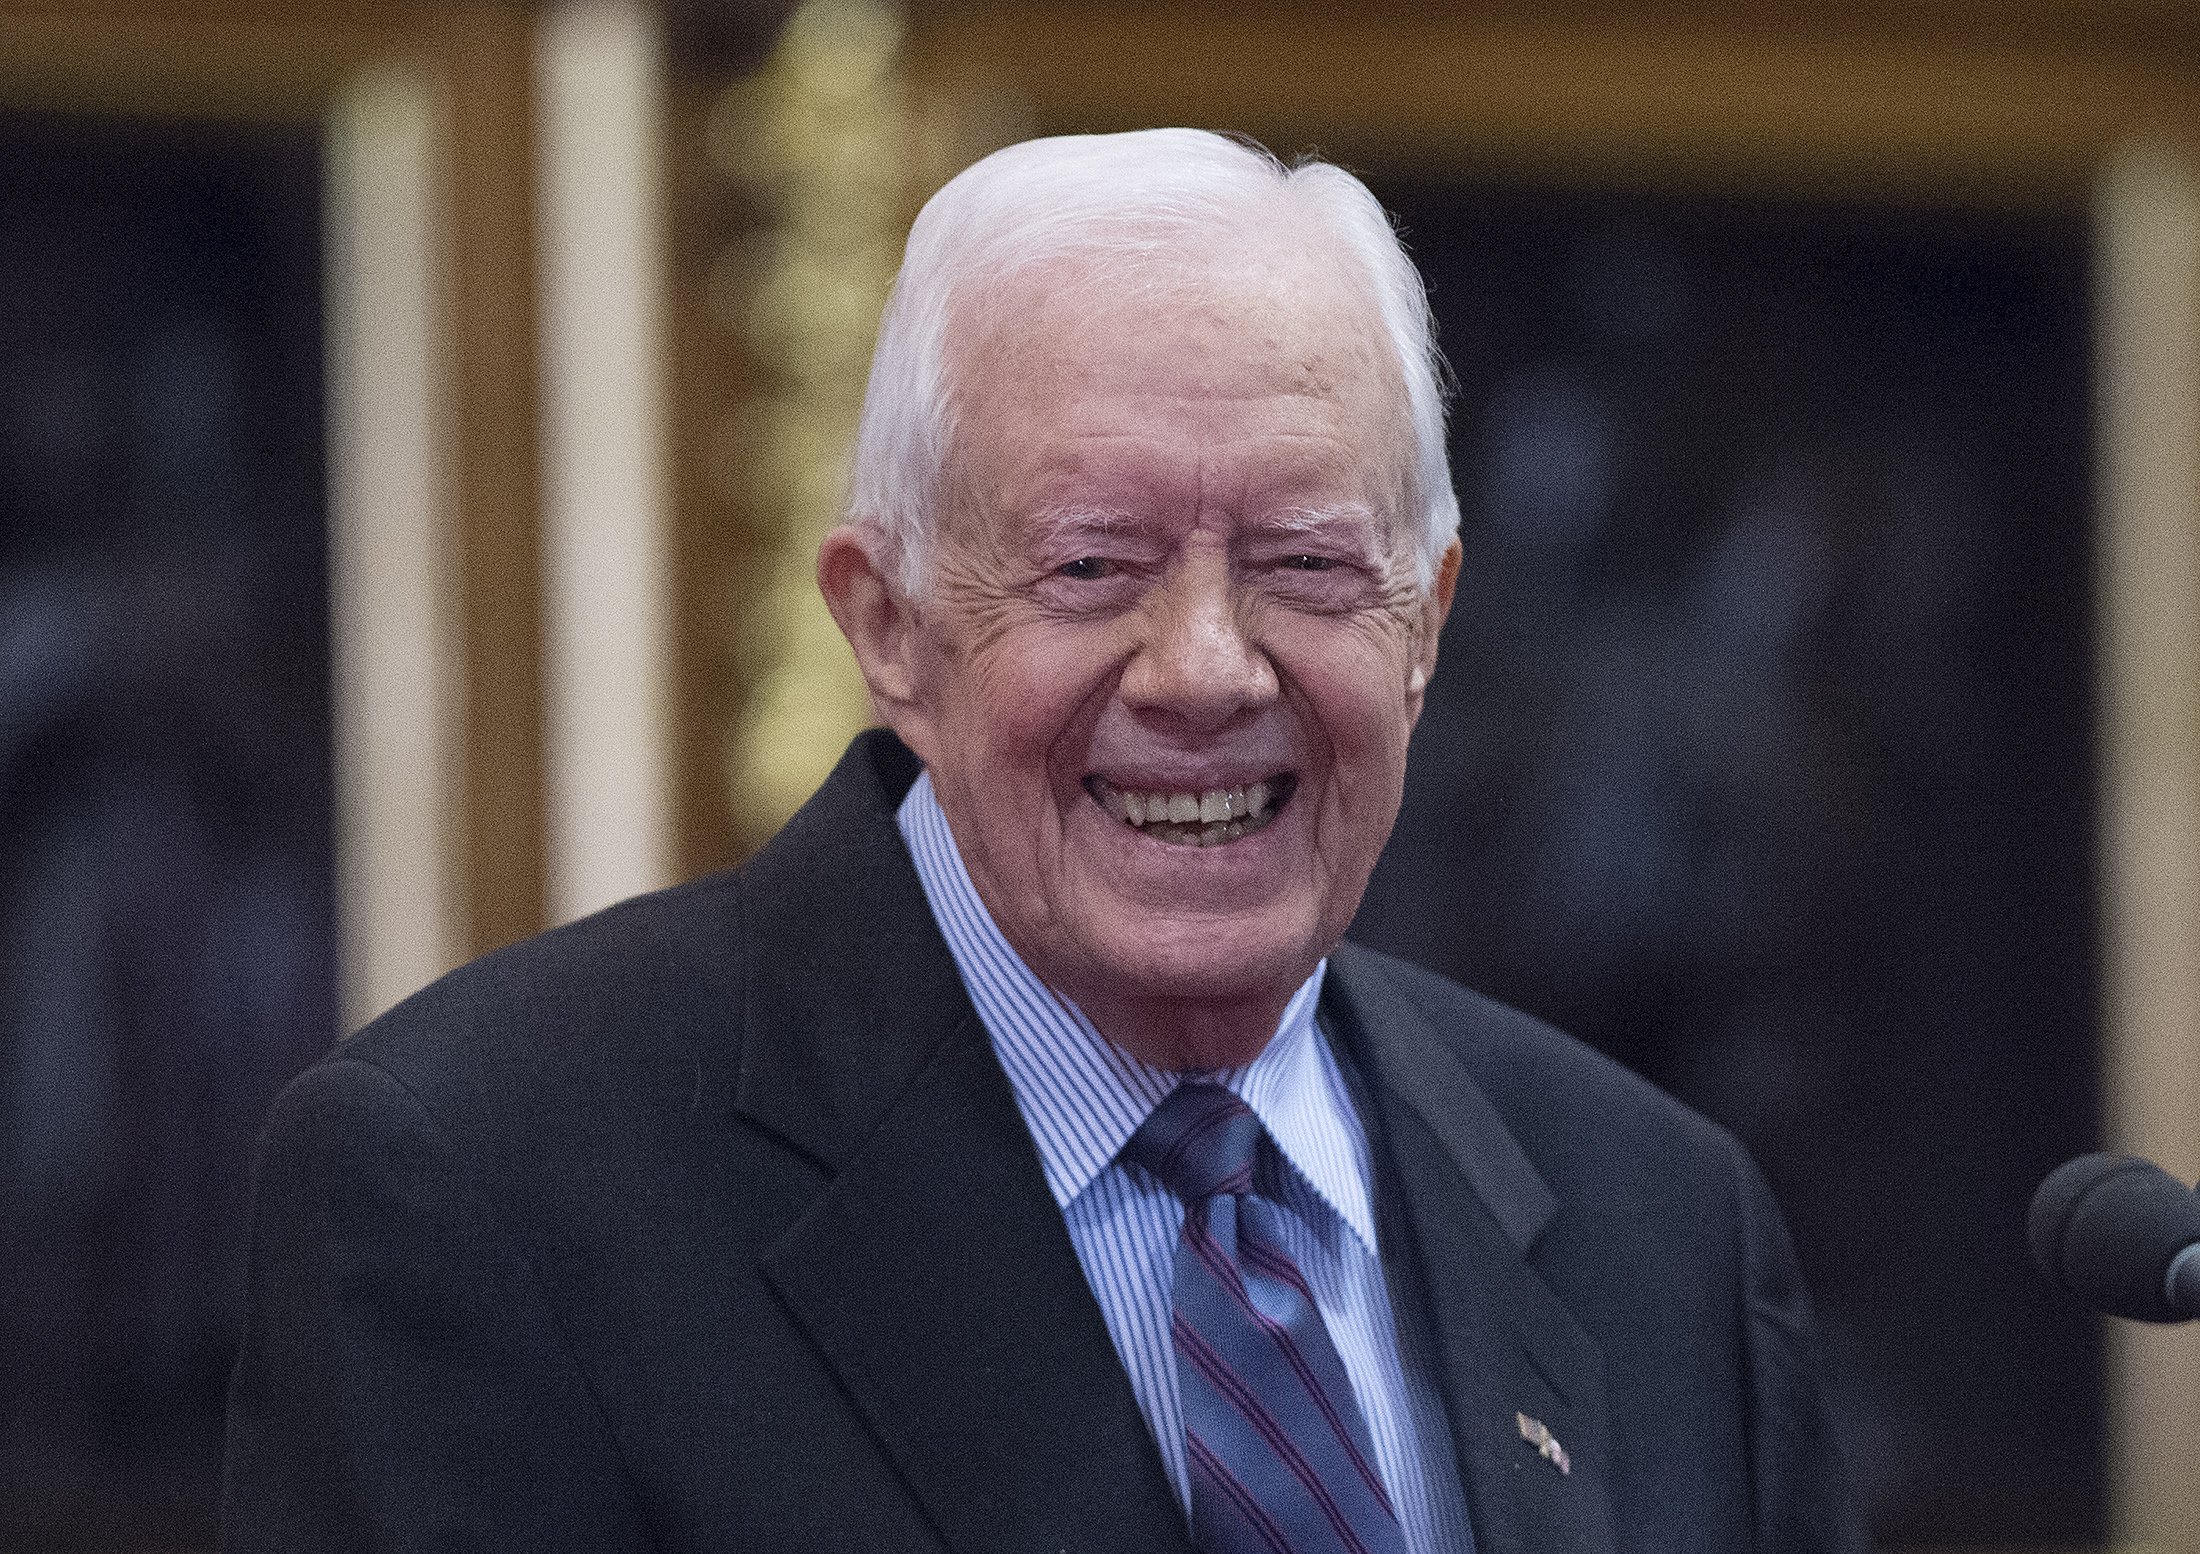 Jimmy Carter delivers a lecture on the eradication of the Guinea worm, at the House of Lords on February 3, 2016 in London. | Source: Getty Images.